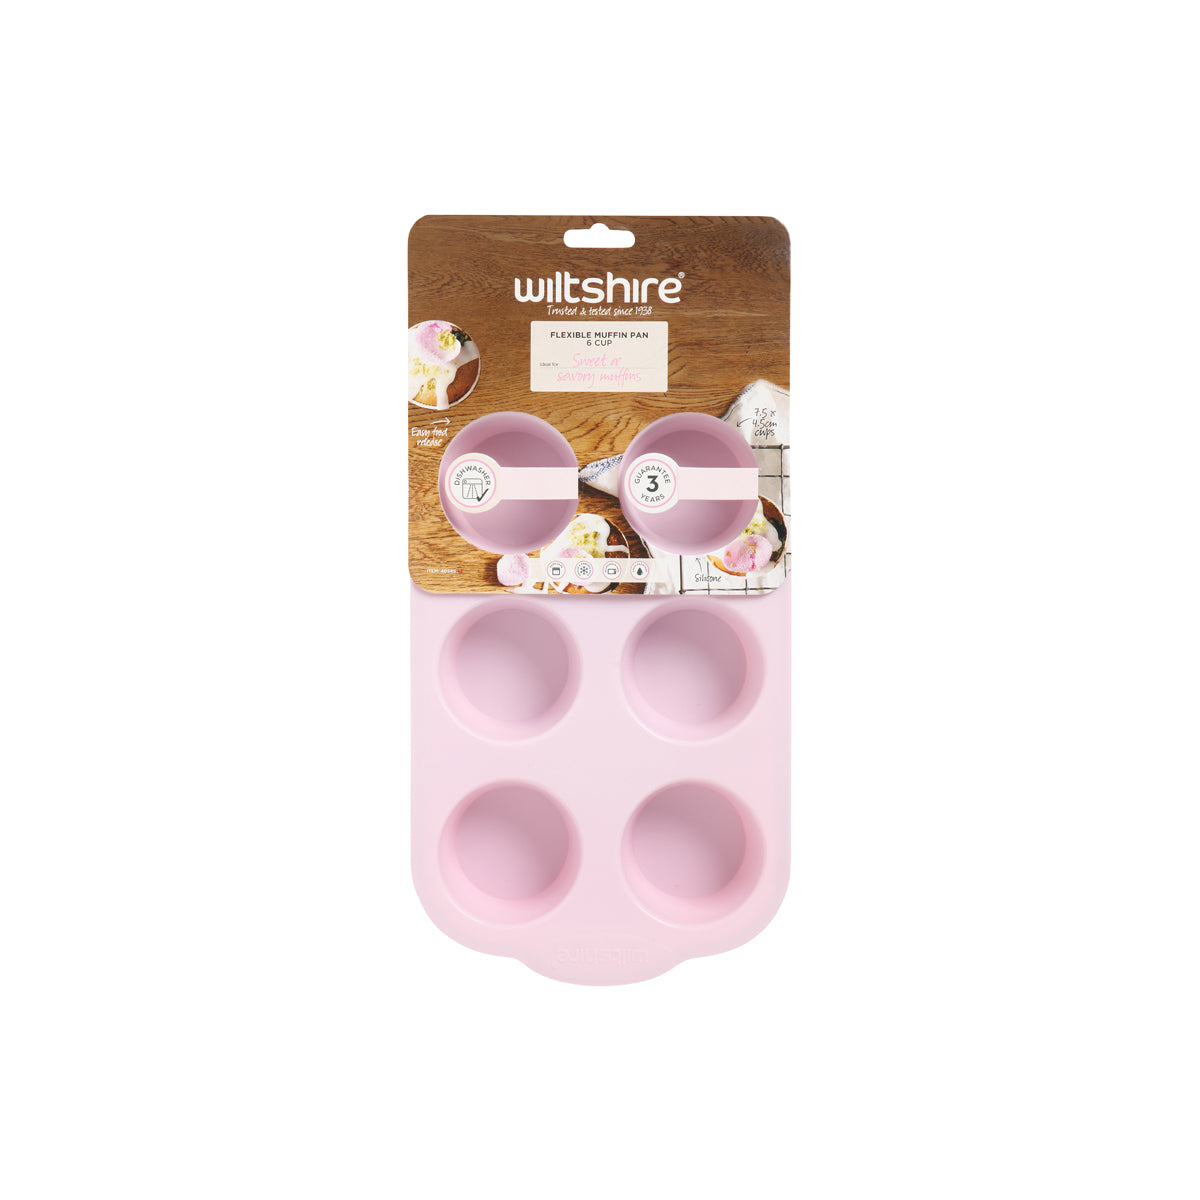 https://tomkin.com.au/cdn/shop/products/WLT40245_WILTSHIRE_PINK_MUFFIN_PAN_6_CUP_SILICONE_PACKAGING_LR_1200x.jpg?v=1677462963